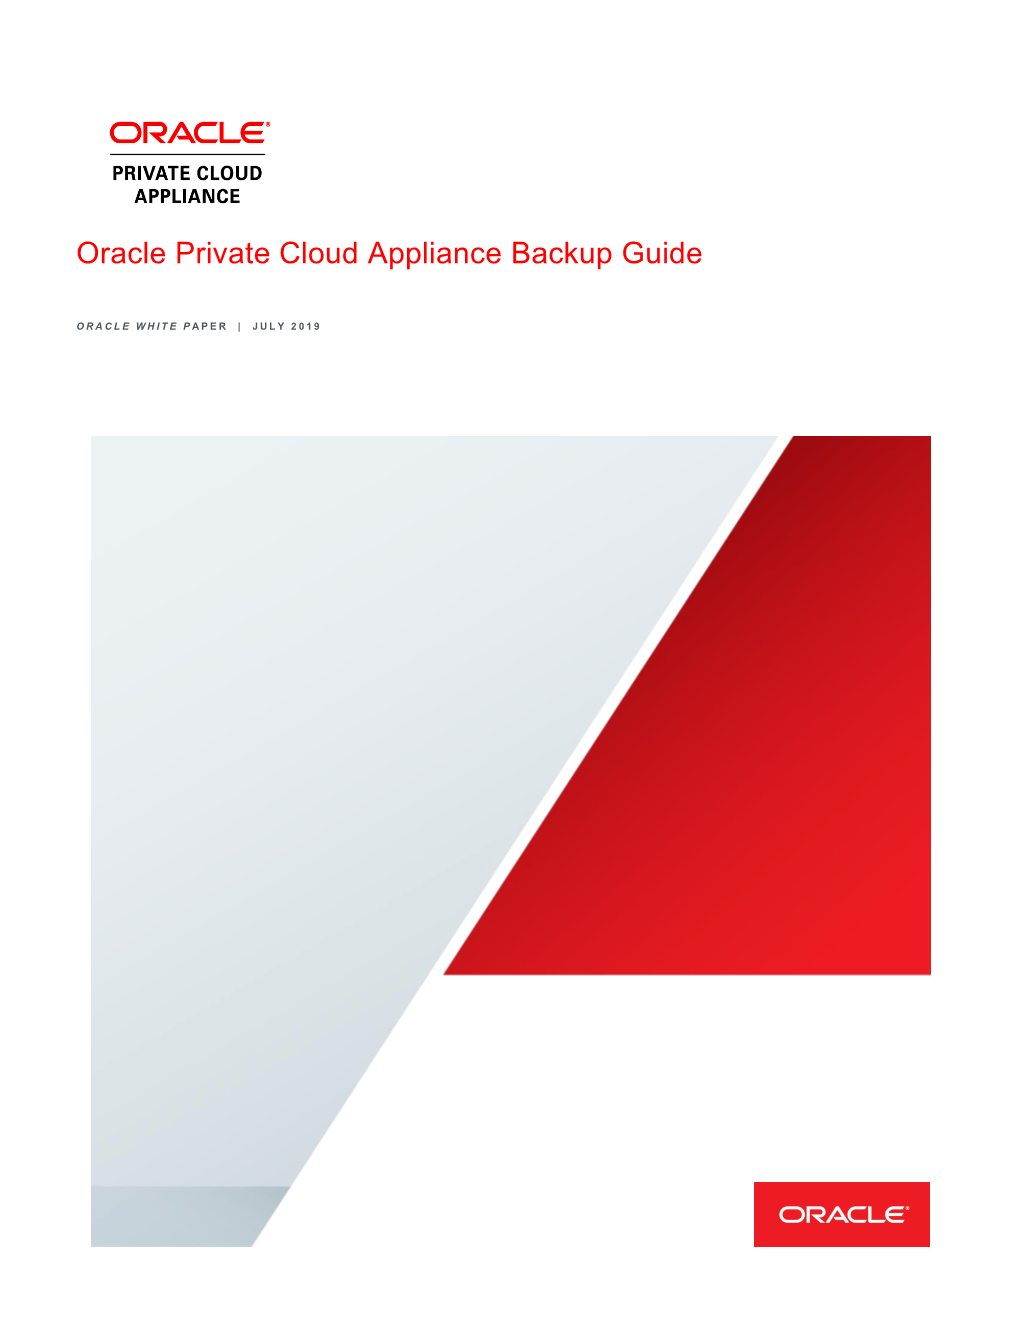 Oracle Private Cloud Appliance Backup Guide